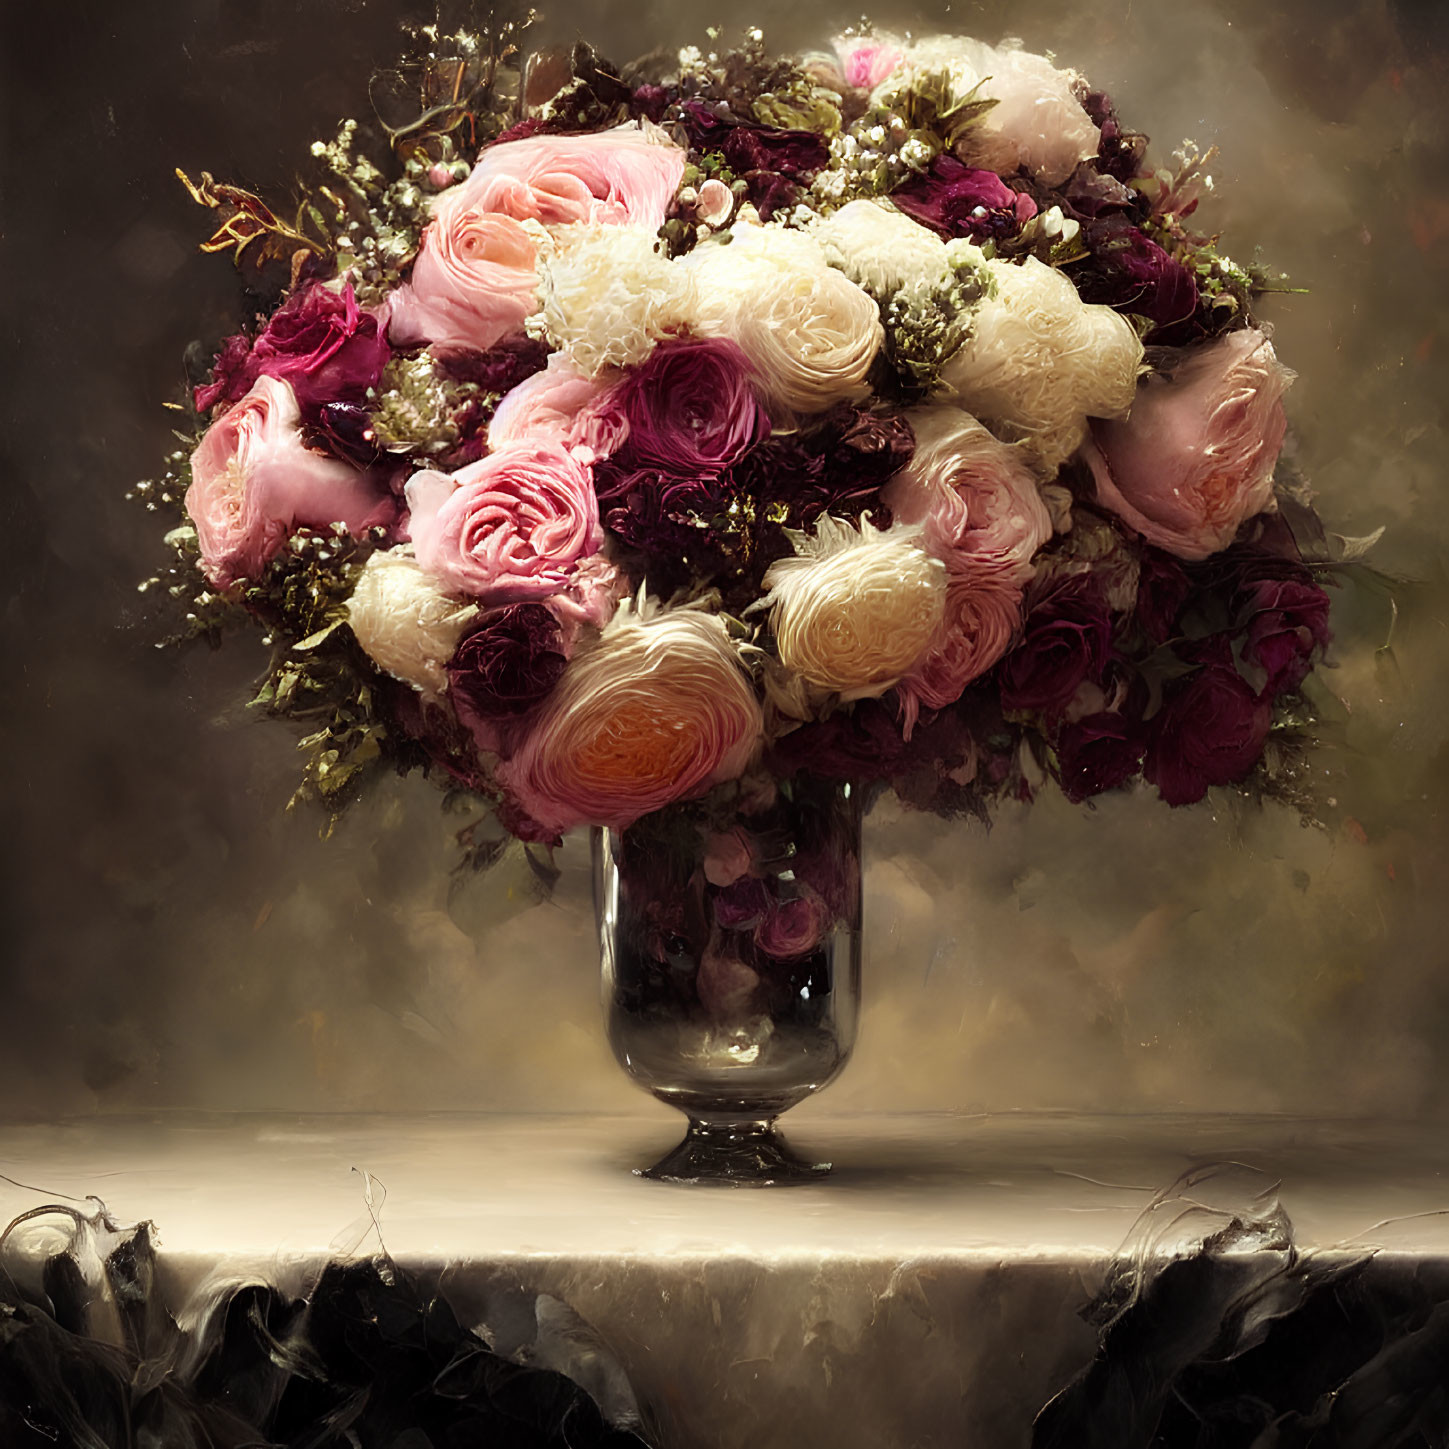 Pink and White Roses Bouquet in Clear Glass Vase on Dark Background